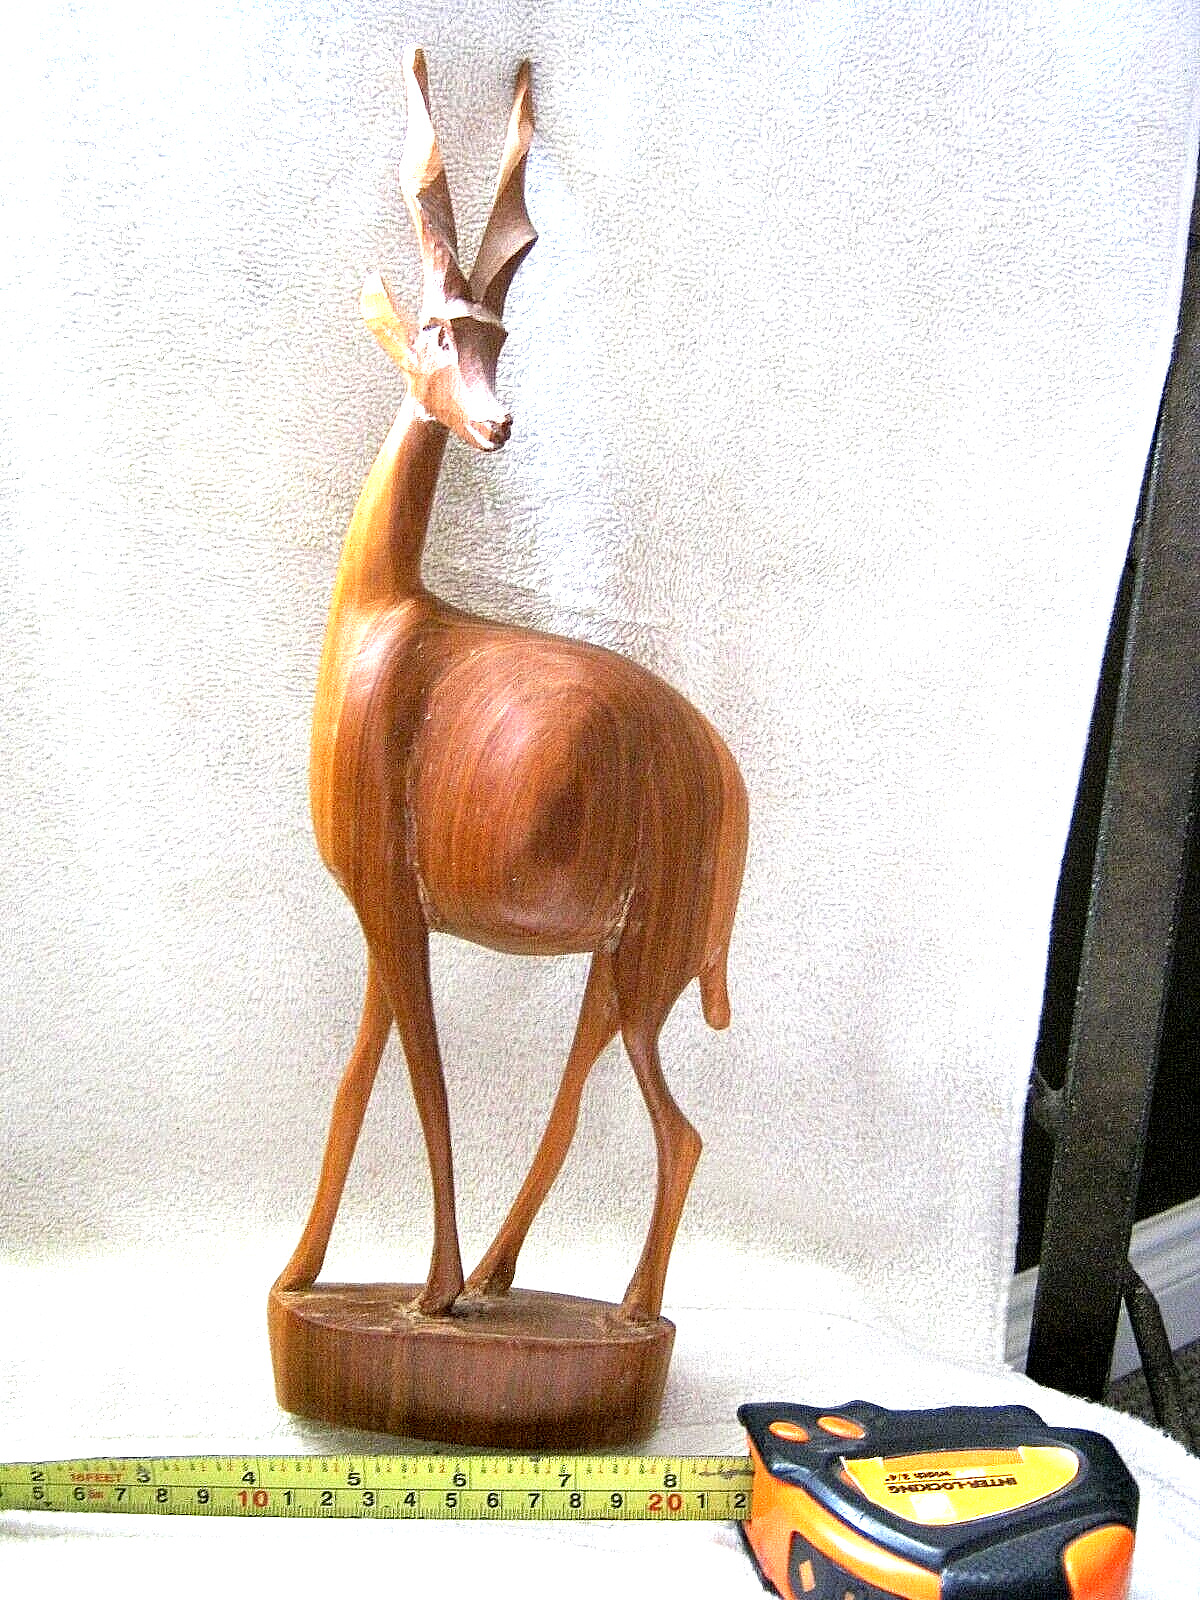 Vintage Hand-Carved Wooden Antelope/Gazelle 13 3/4” Tall